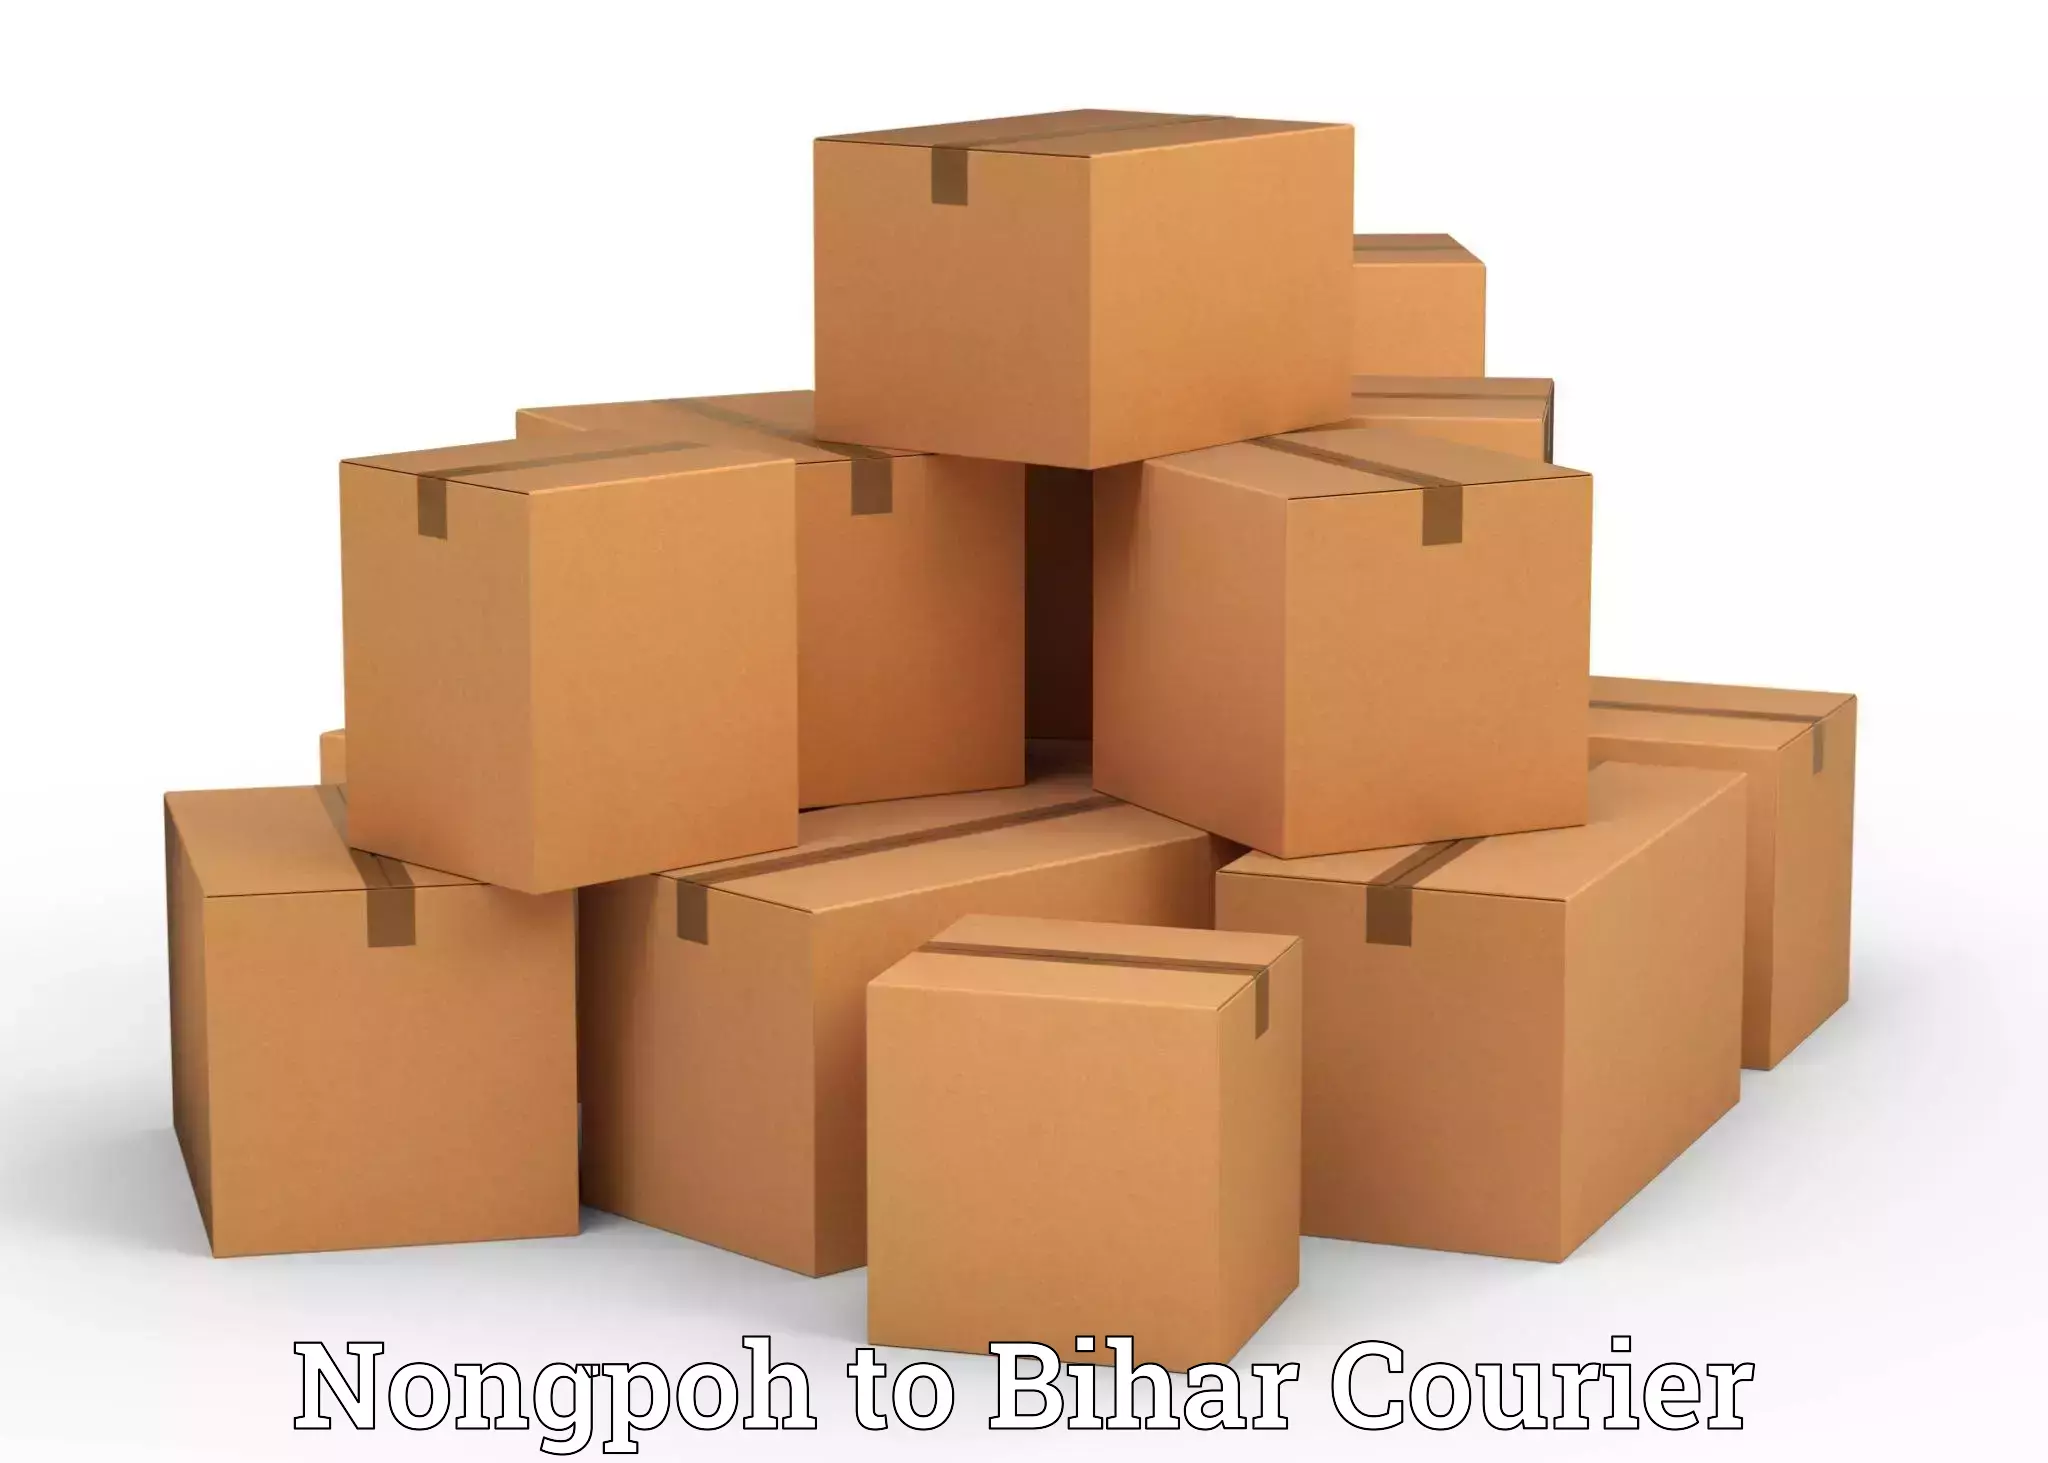 Trusted moving company Nongpoh to Dhaka